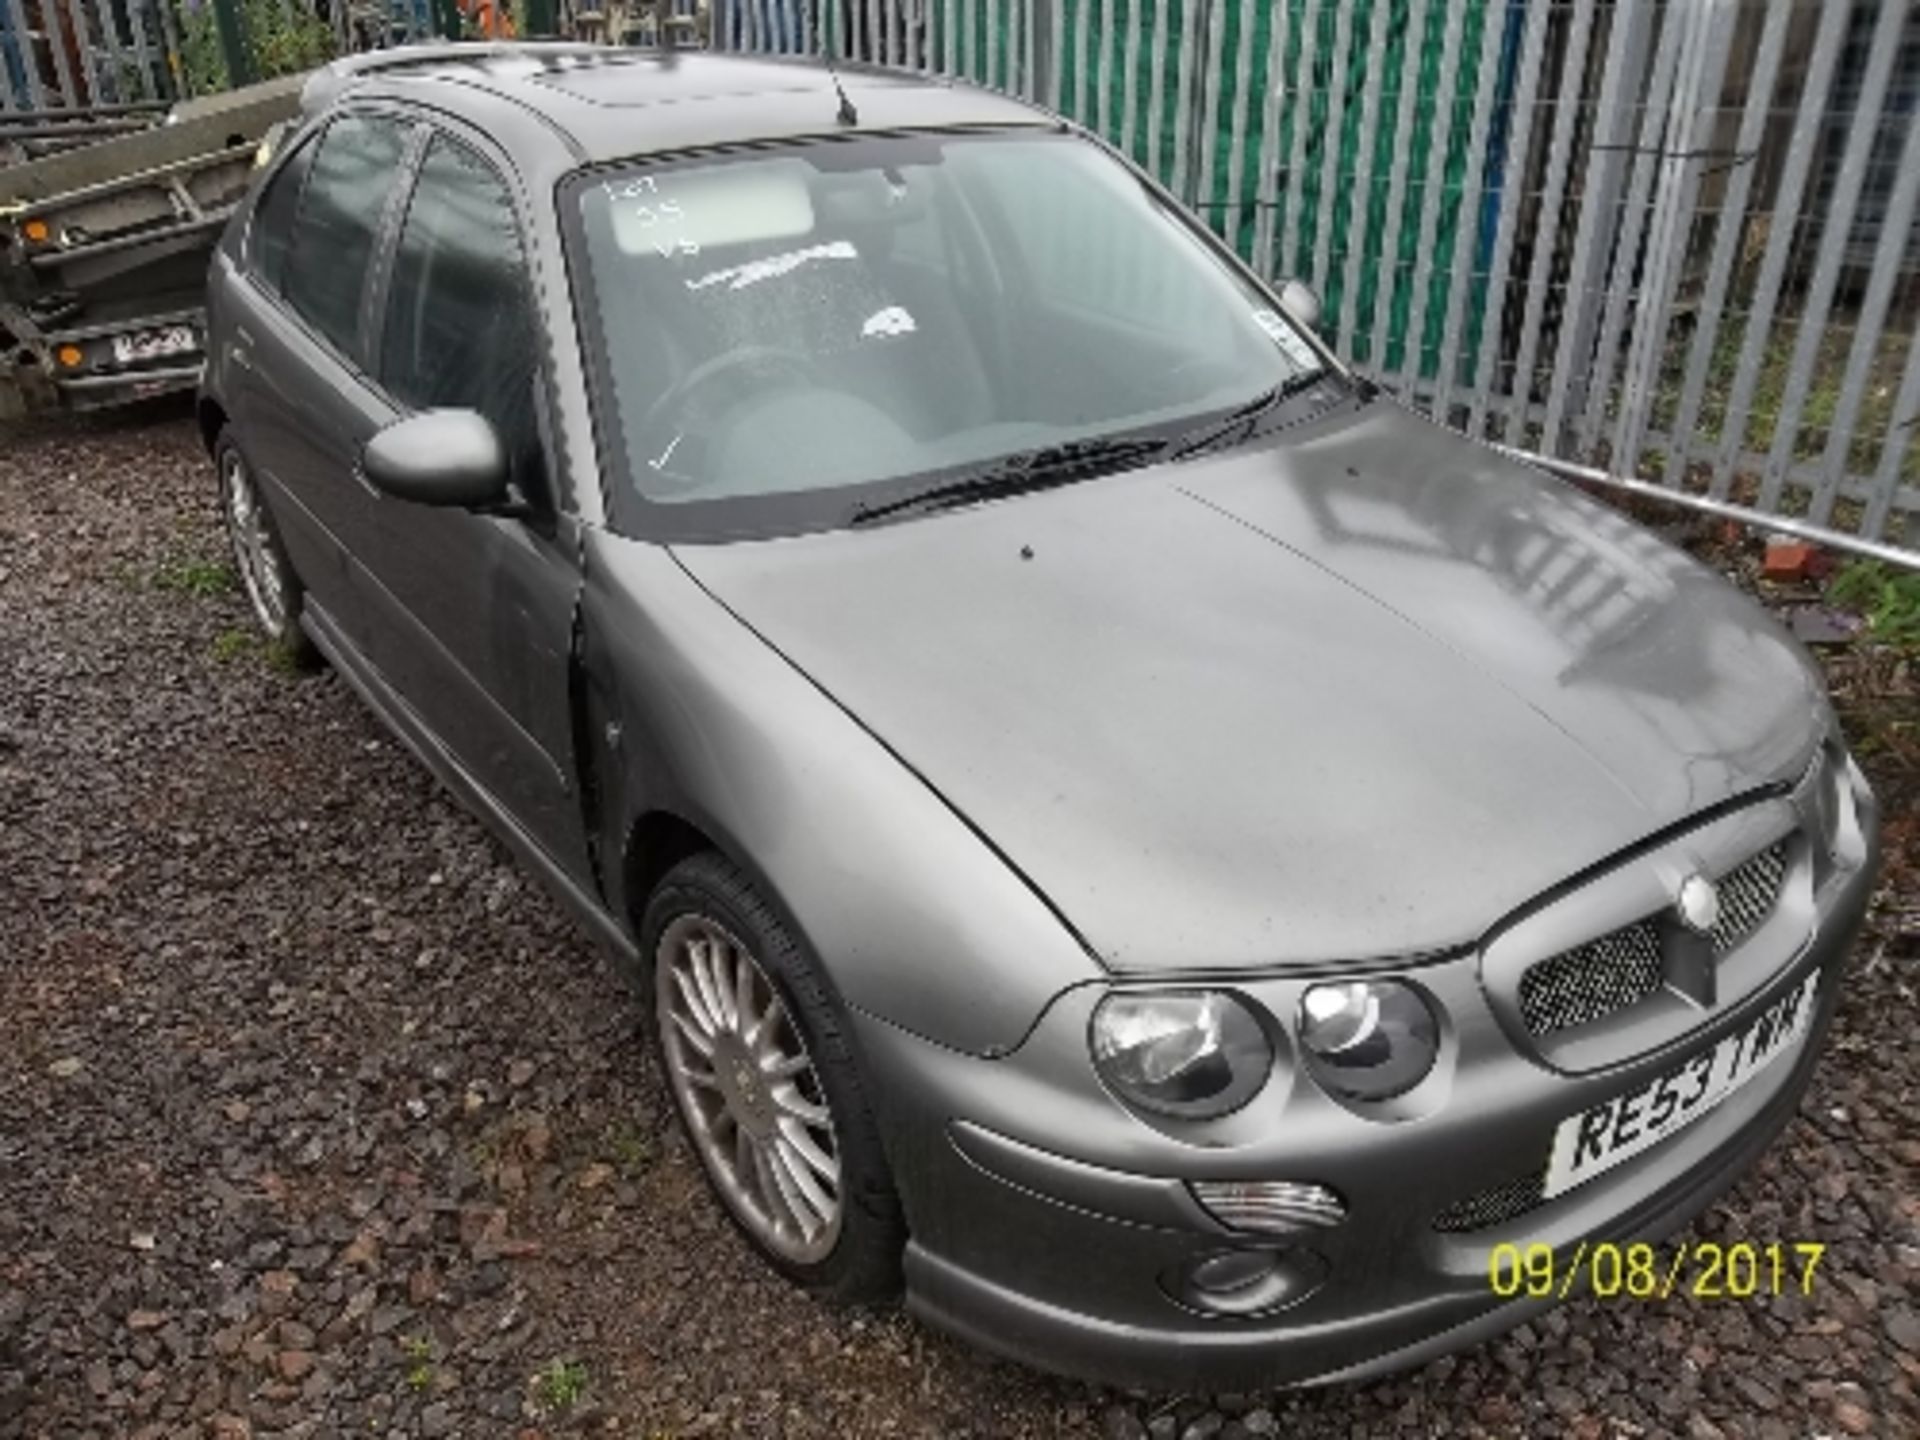 MG ZR+ - RE53 TWM Date of registration: 01.09.2003 1796cc, petrol, manual, grey Odometer reading - Image 2 of 4